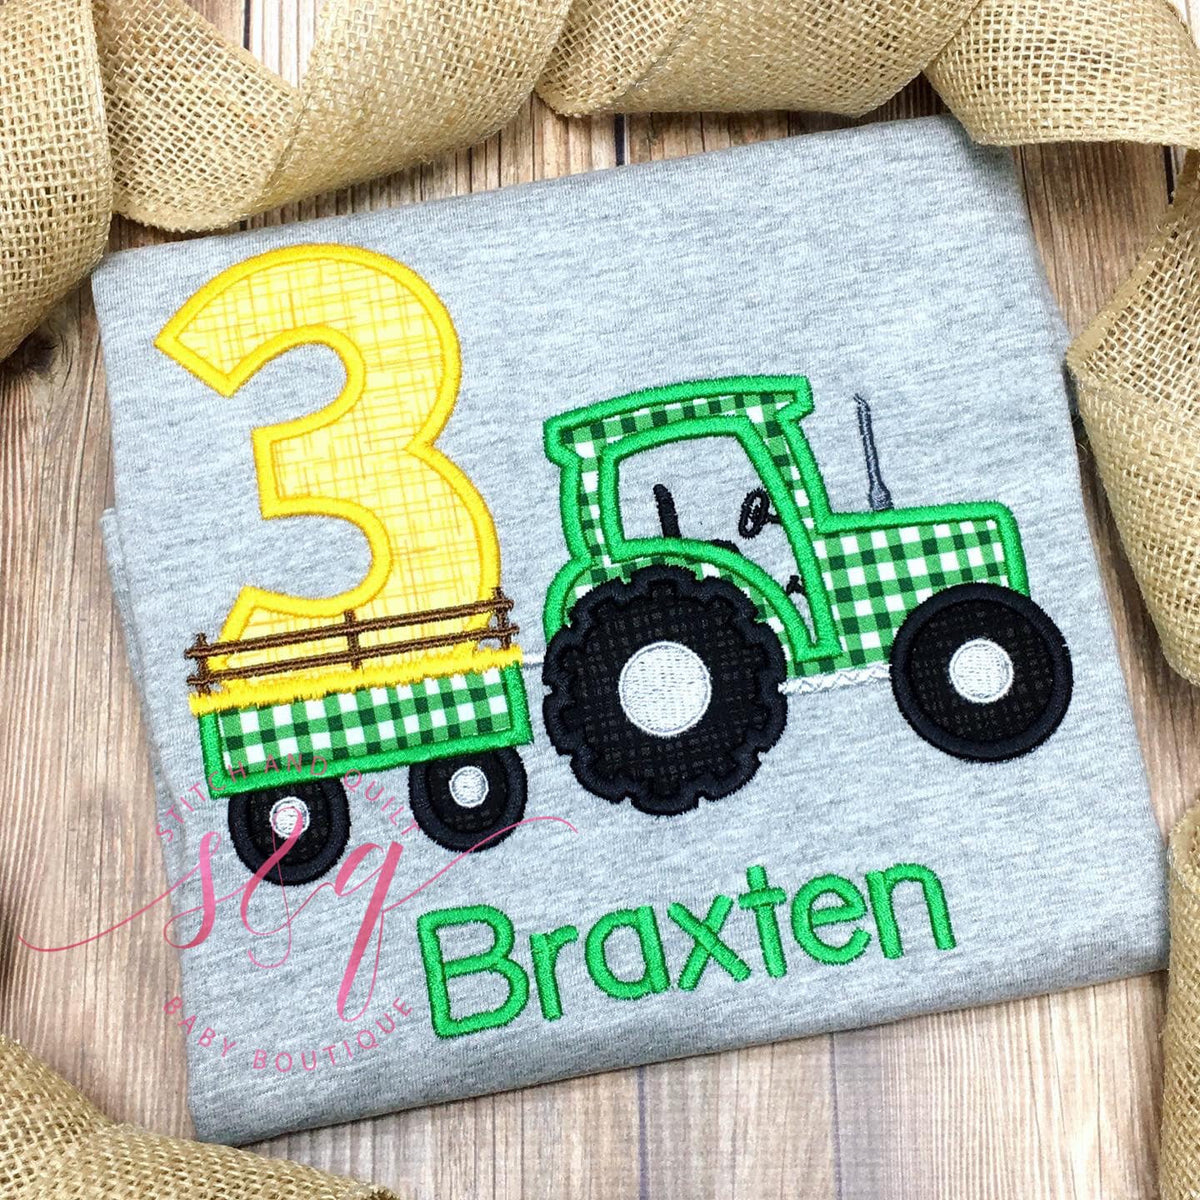 Boys Tractor Shirt, Personalized Tractor Shirt, Tractor Birthday Shirt, Baby boy Tractor Shirt